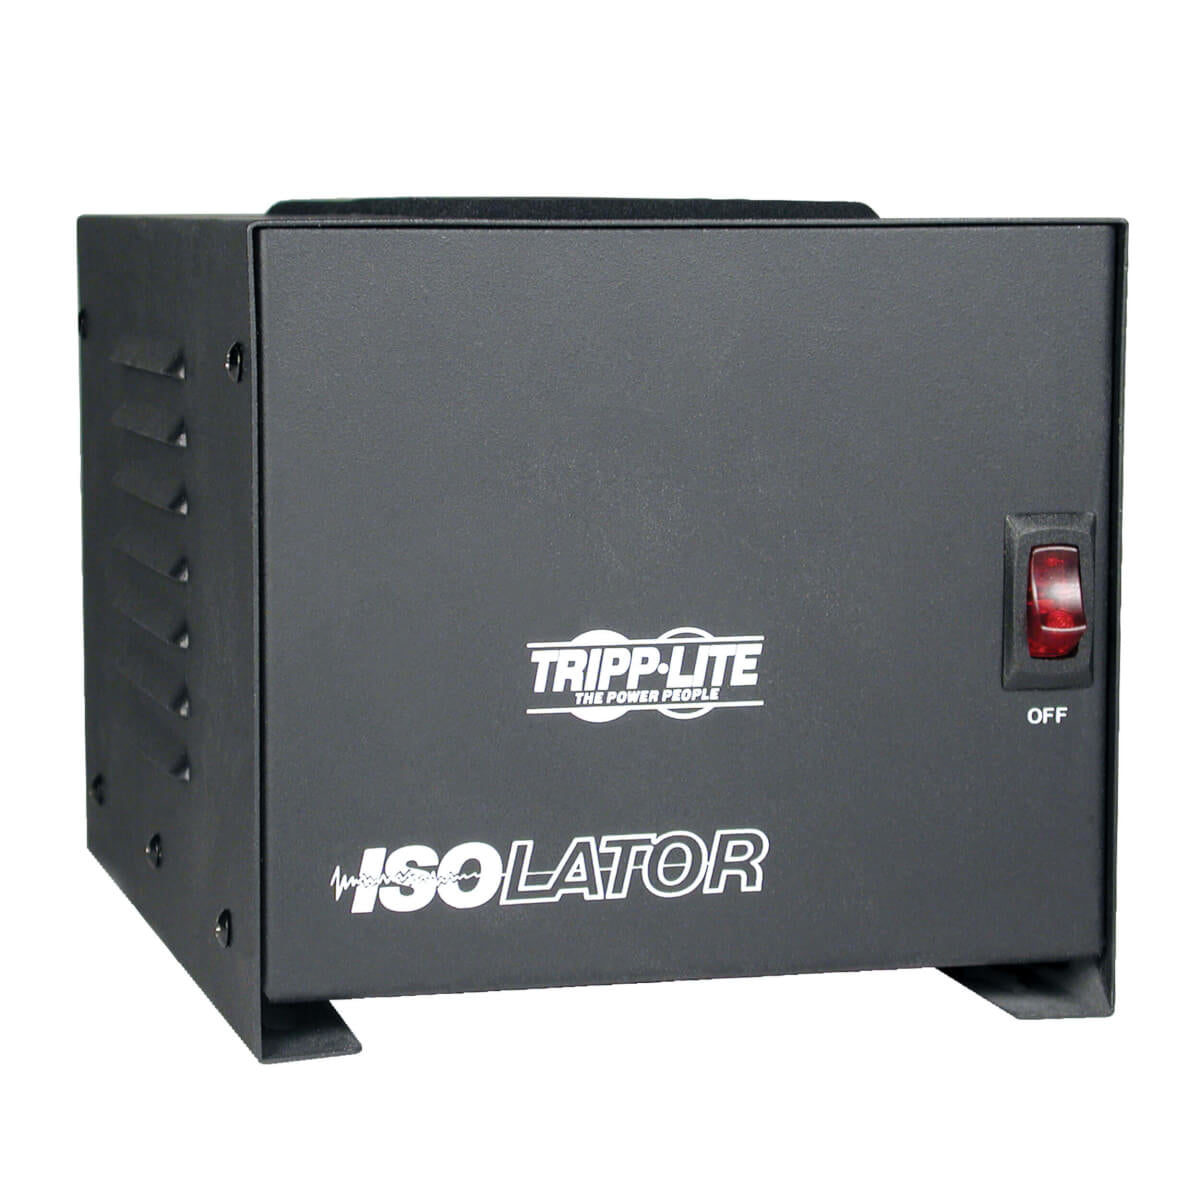 Tripp Lite Isolator Series 120V 1000W Isolation Transformer-Based Power Conditioner, 4 Outlets